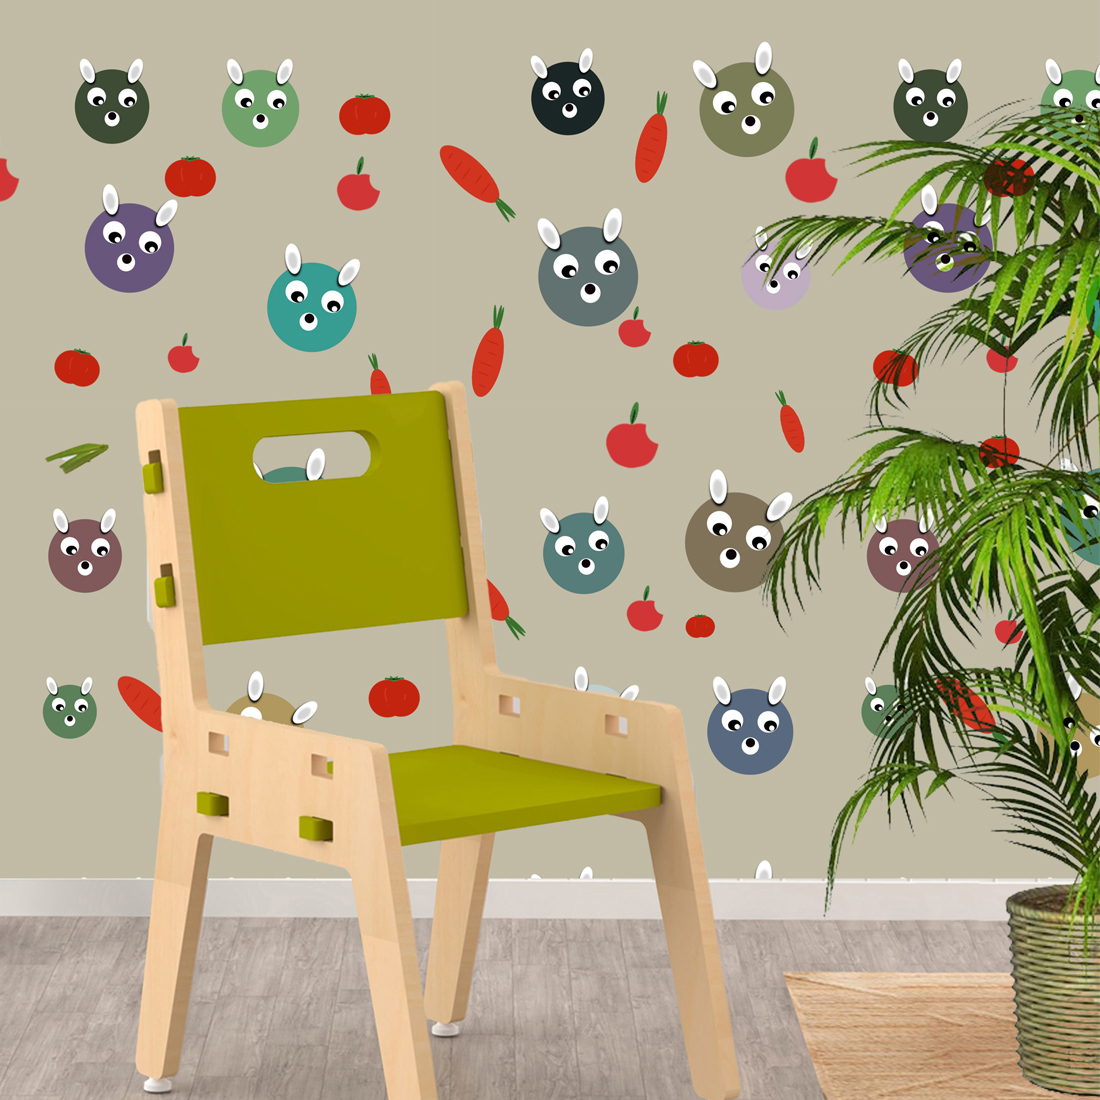 seamless patterns for kids room decoration preview image.